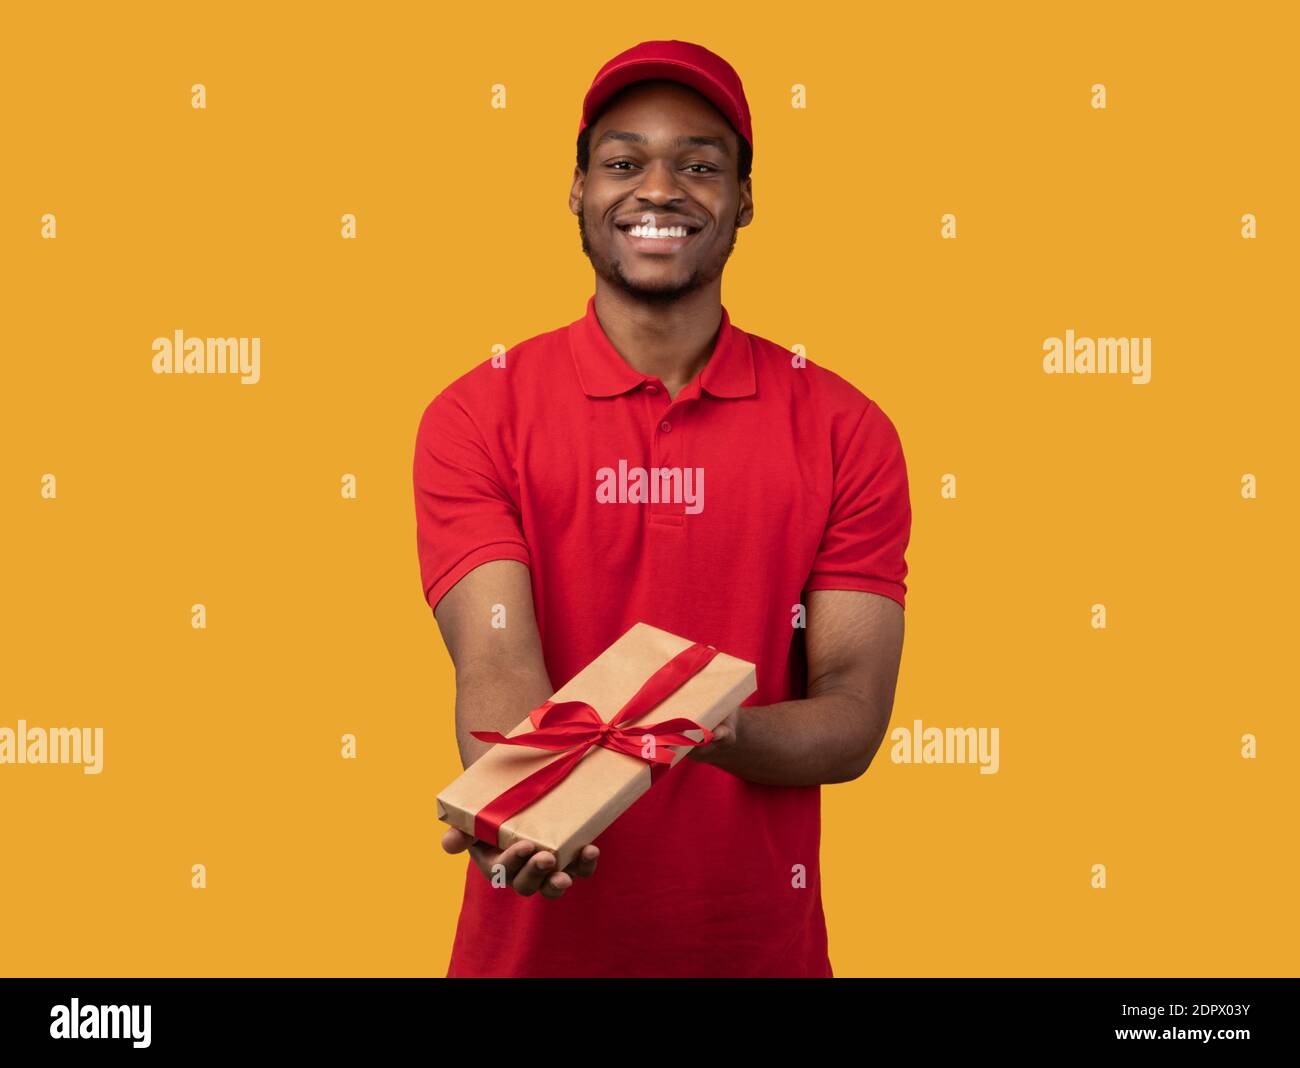 Black delivery man holding gift box showing it to camera Stock Photo